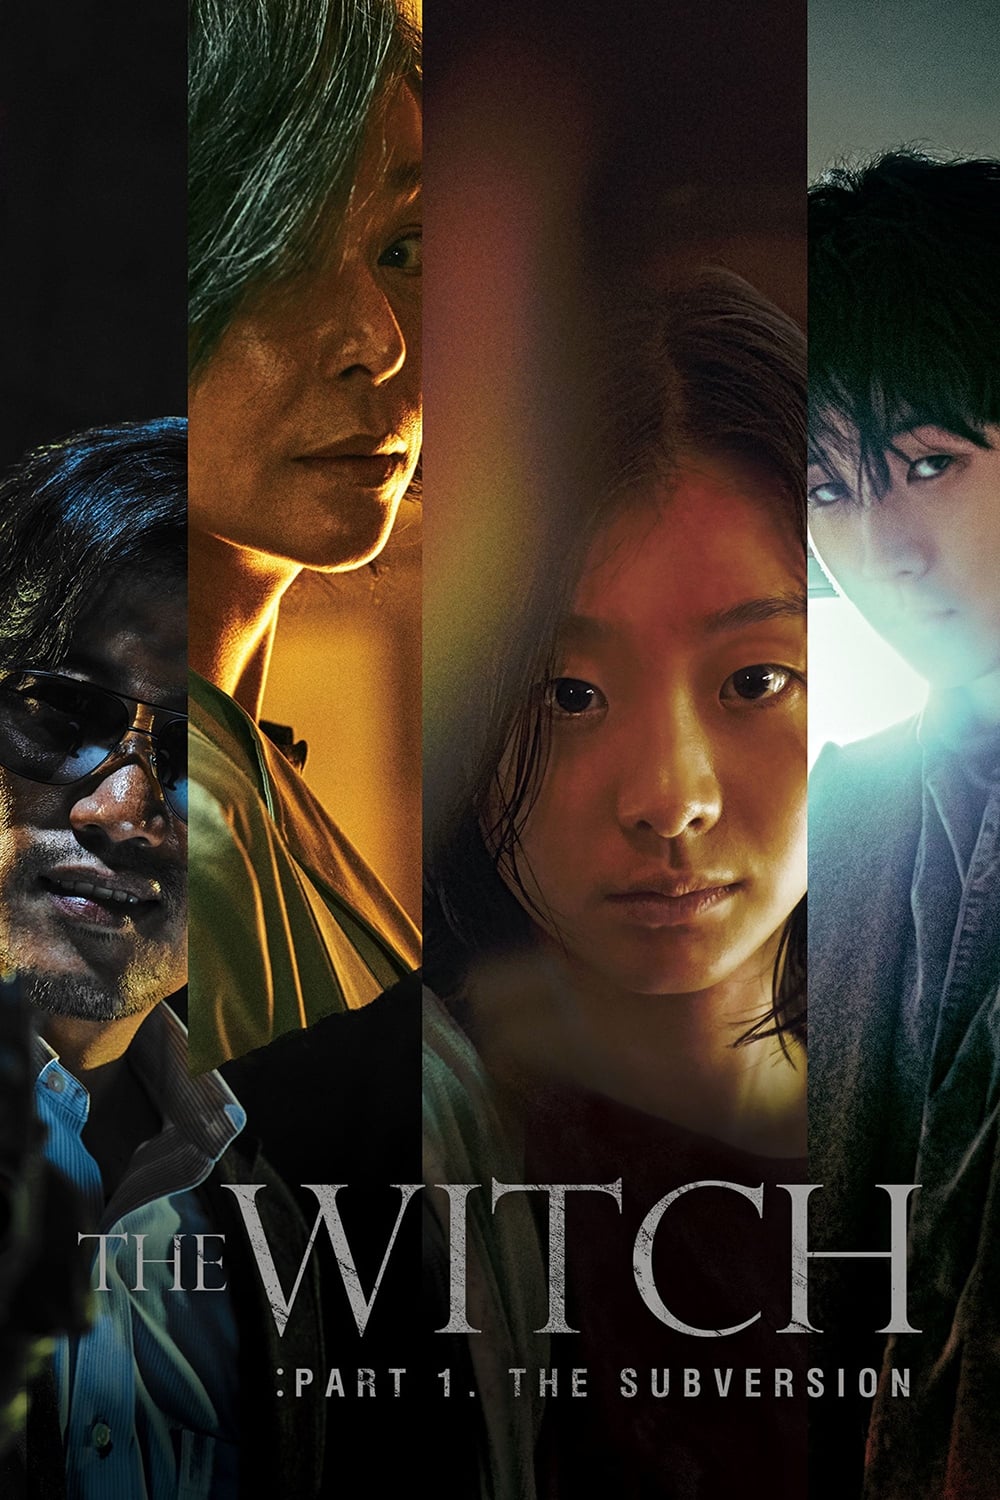 The Witch Part 1 - The Subversion 2018 Tamil Dubbed Mystery Movie Online